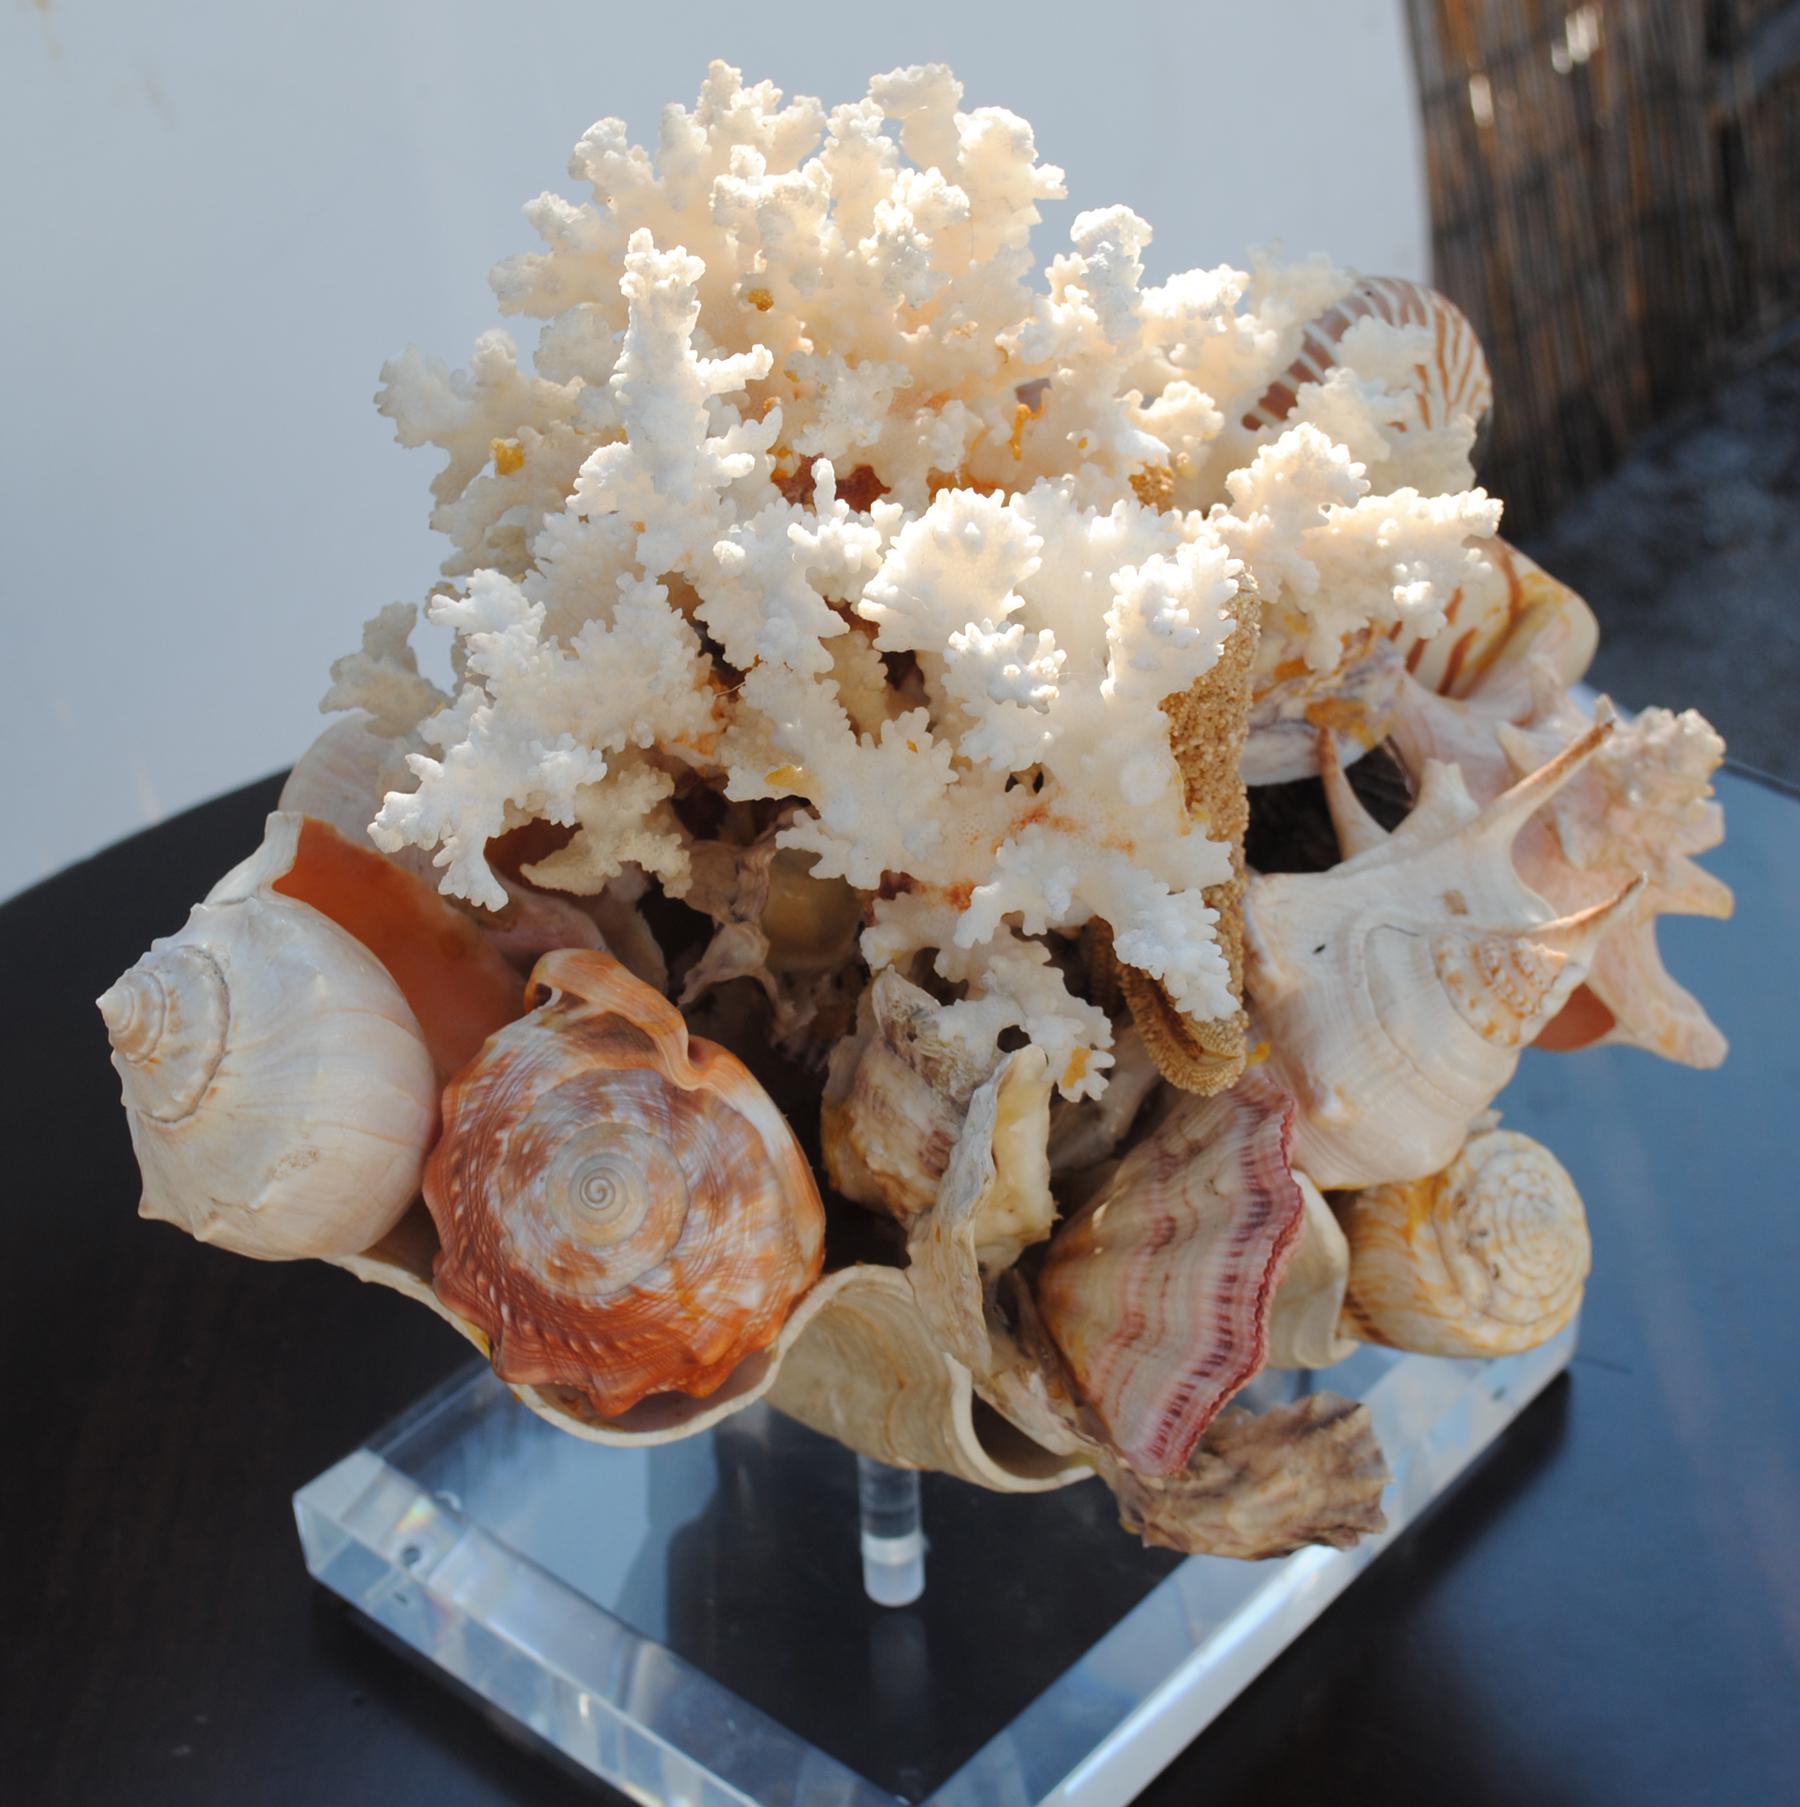 Shells and coral arranged on a large clam shell mounted on a Lucite stand. Large arrangement would make for a statement centrepiece or other decorative purposes.